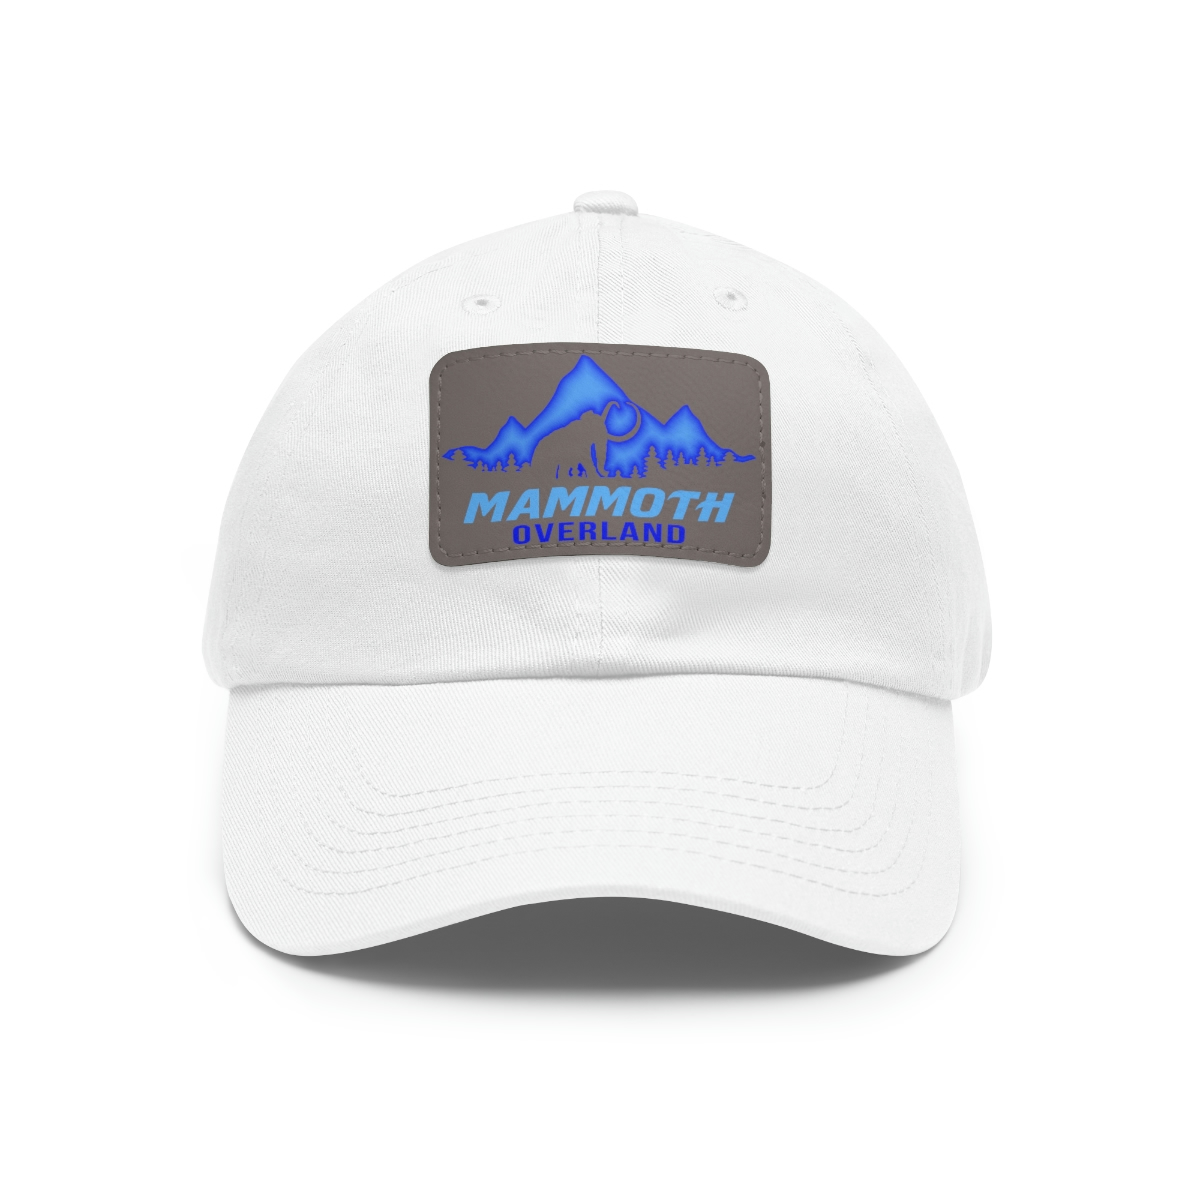 Mammoth hat with Leather Patch- 7 styles! – Mammoth Overland